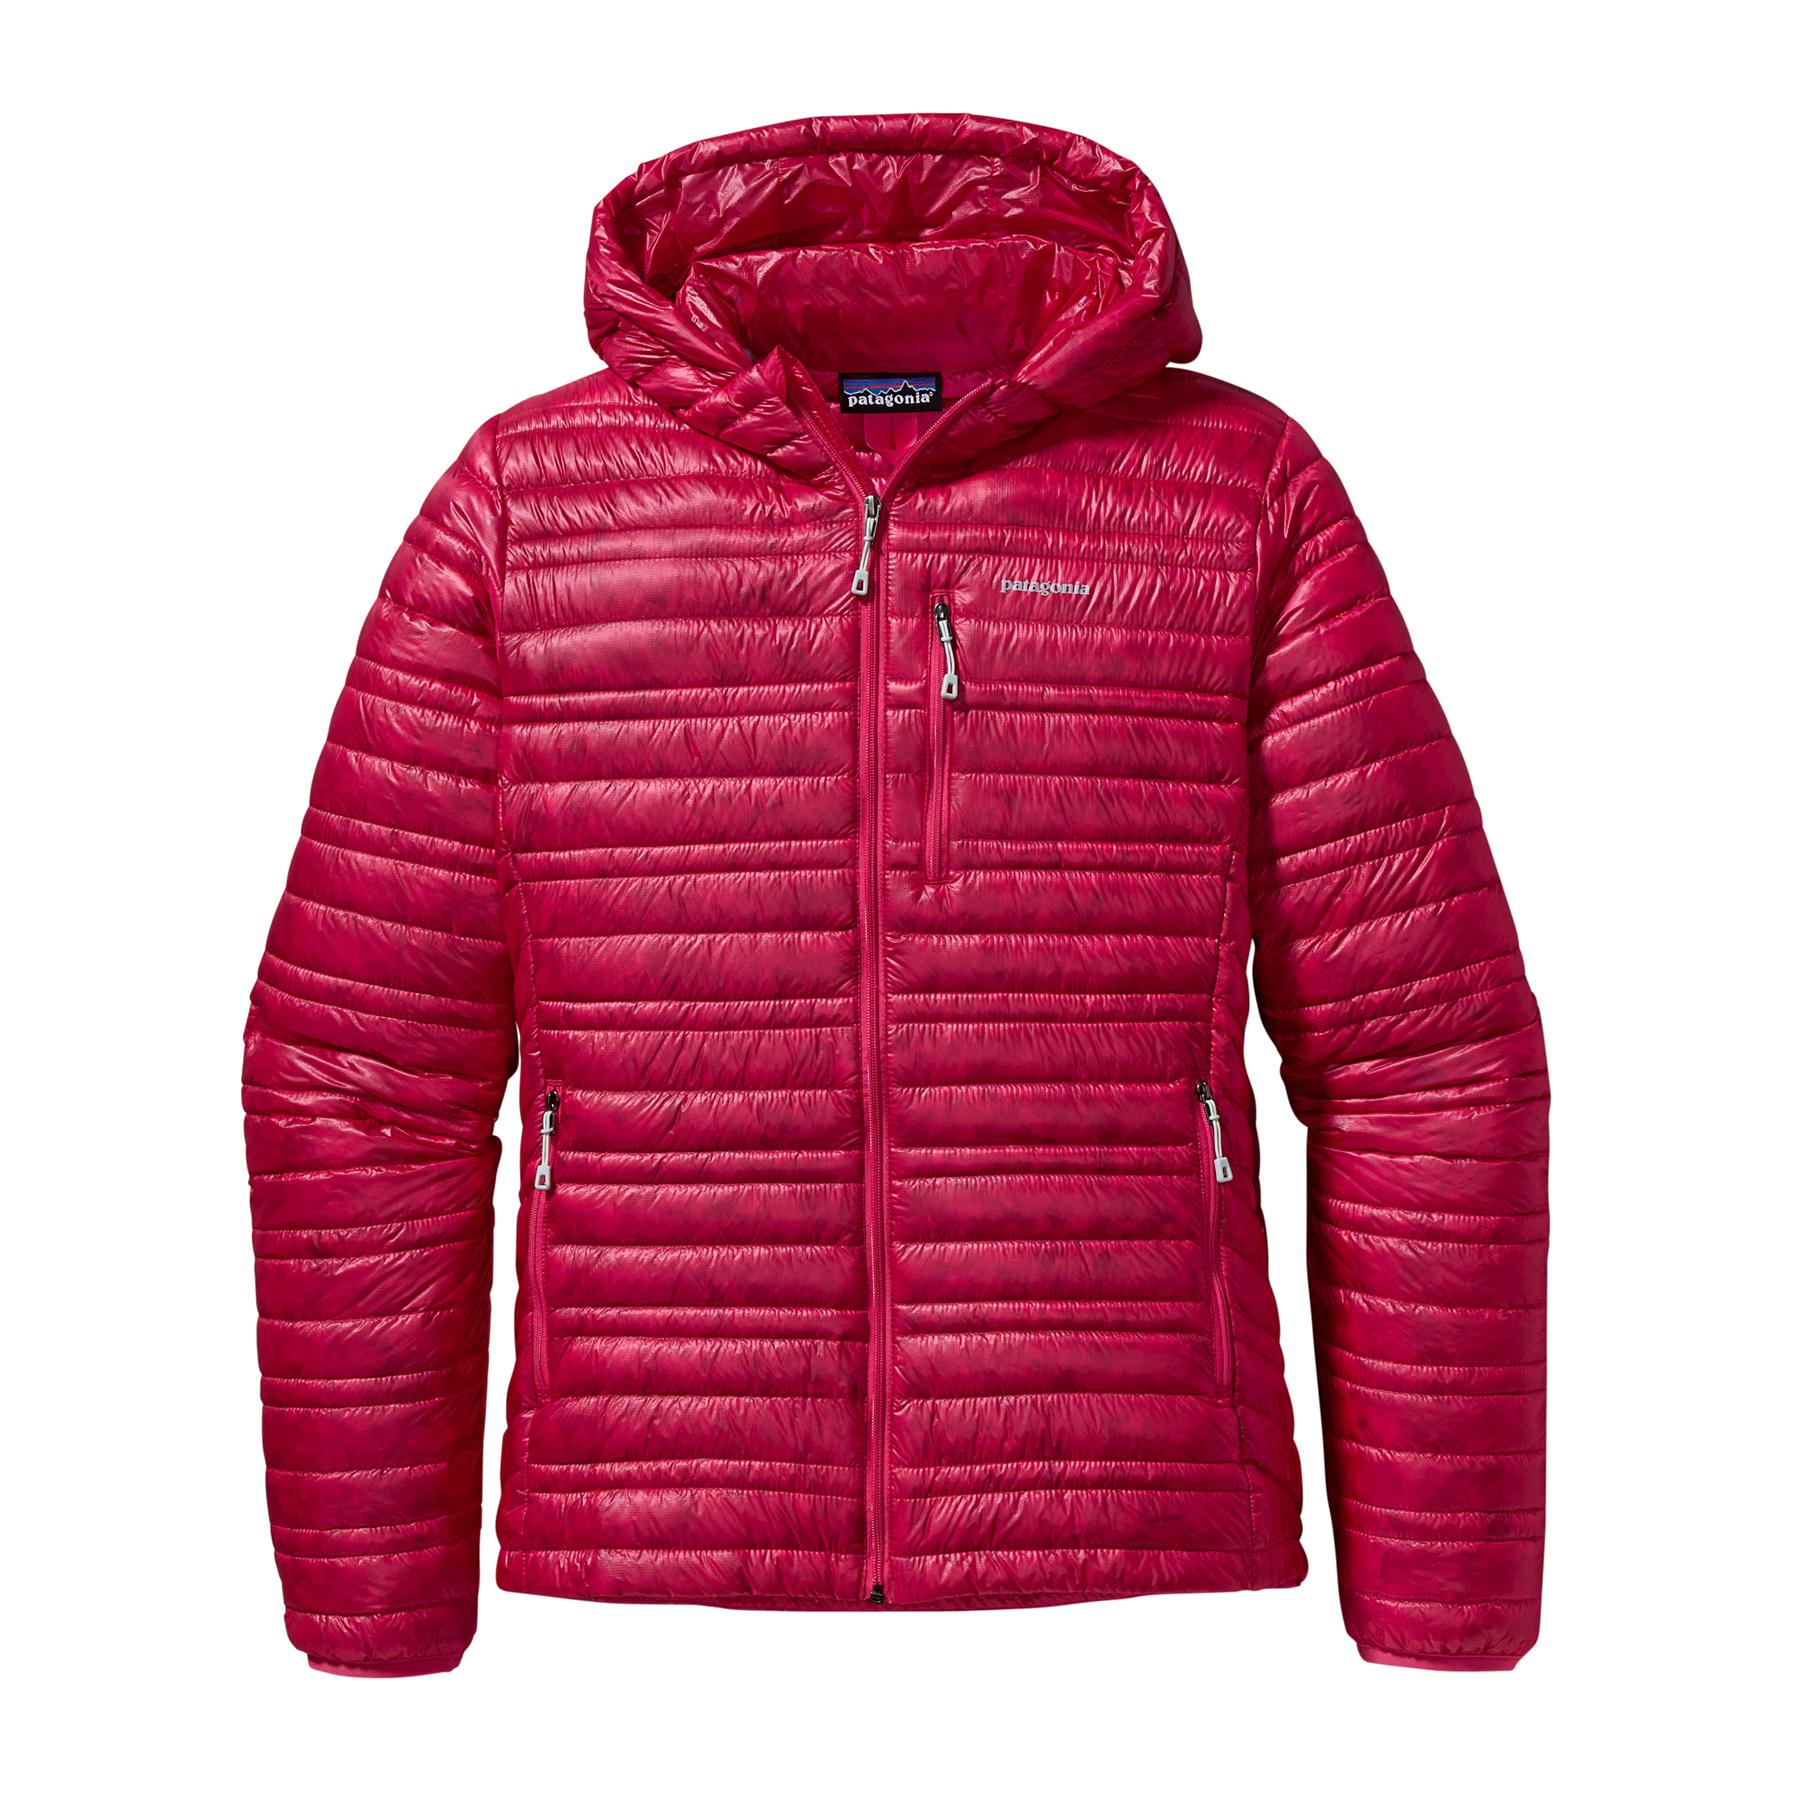 Foto Patagonia Ultralight Down Hoody Lady Rossi Pink (Modell 2013)